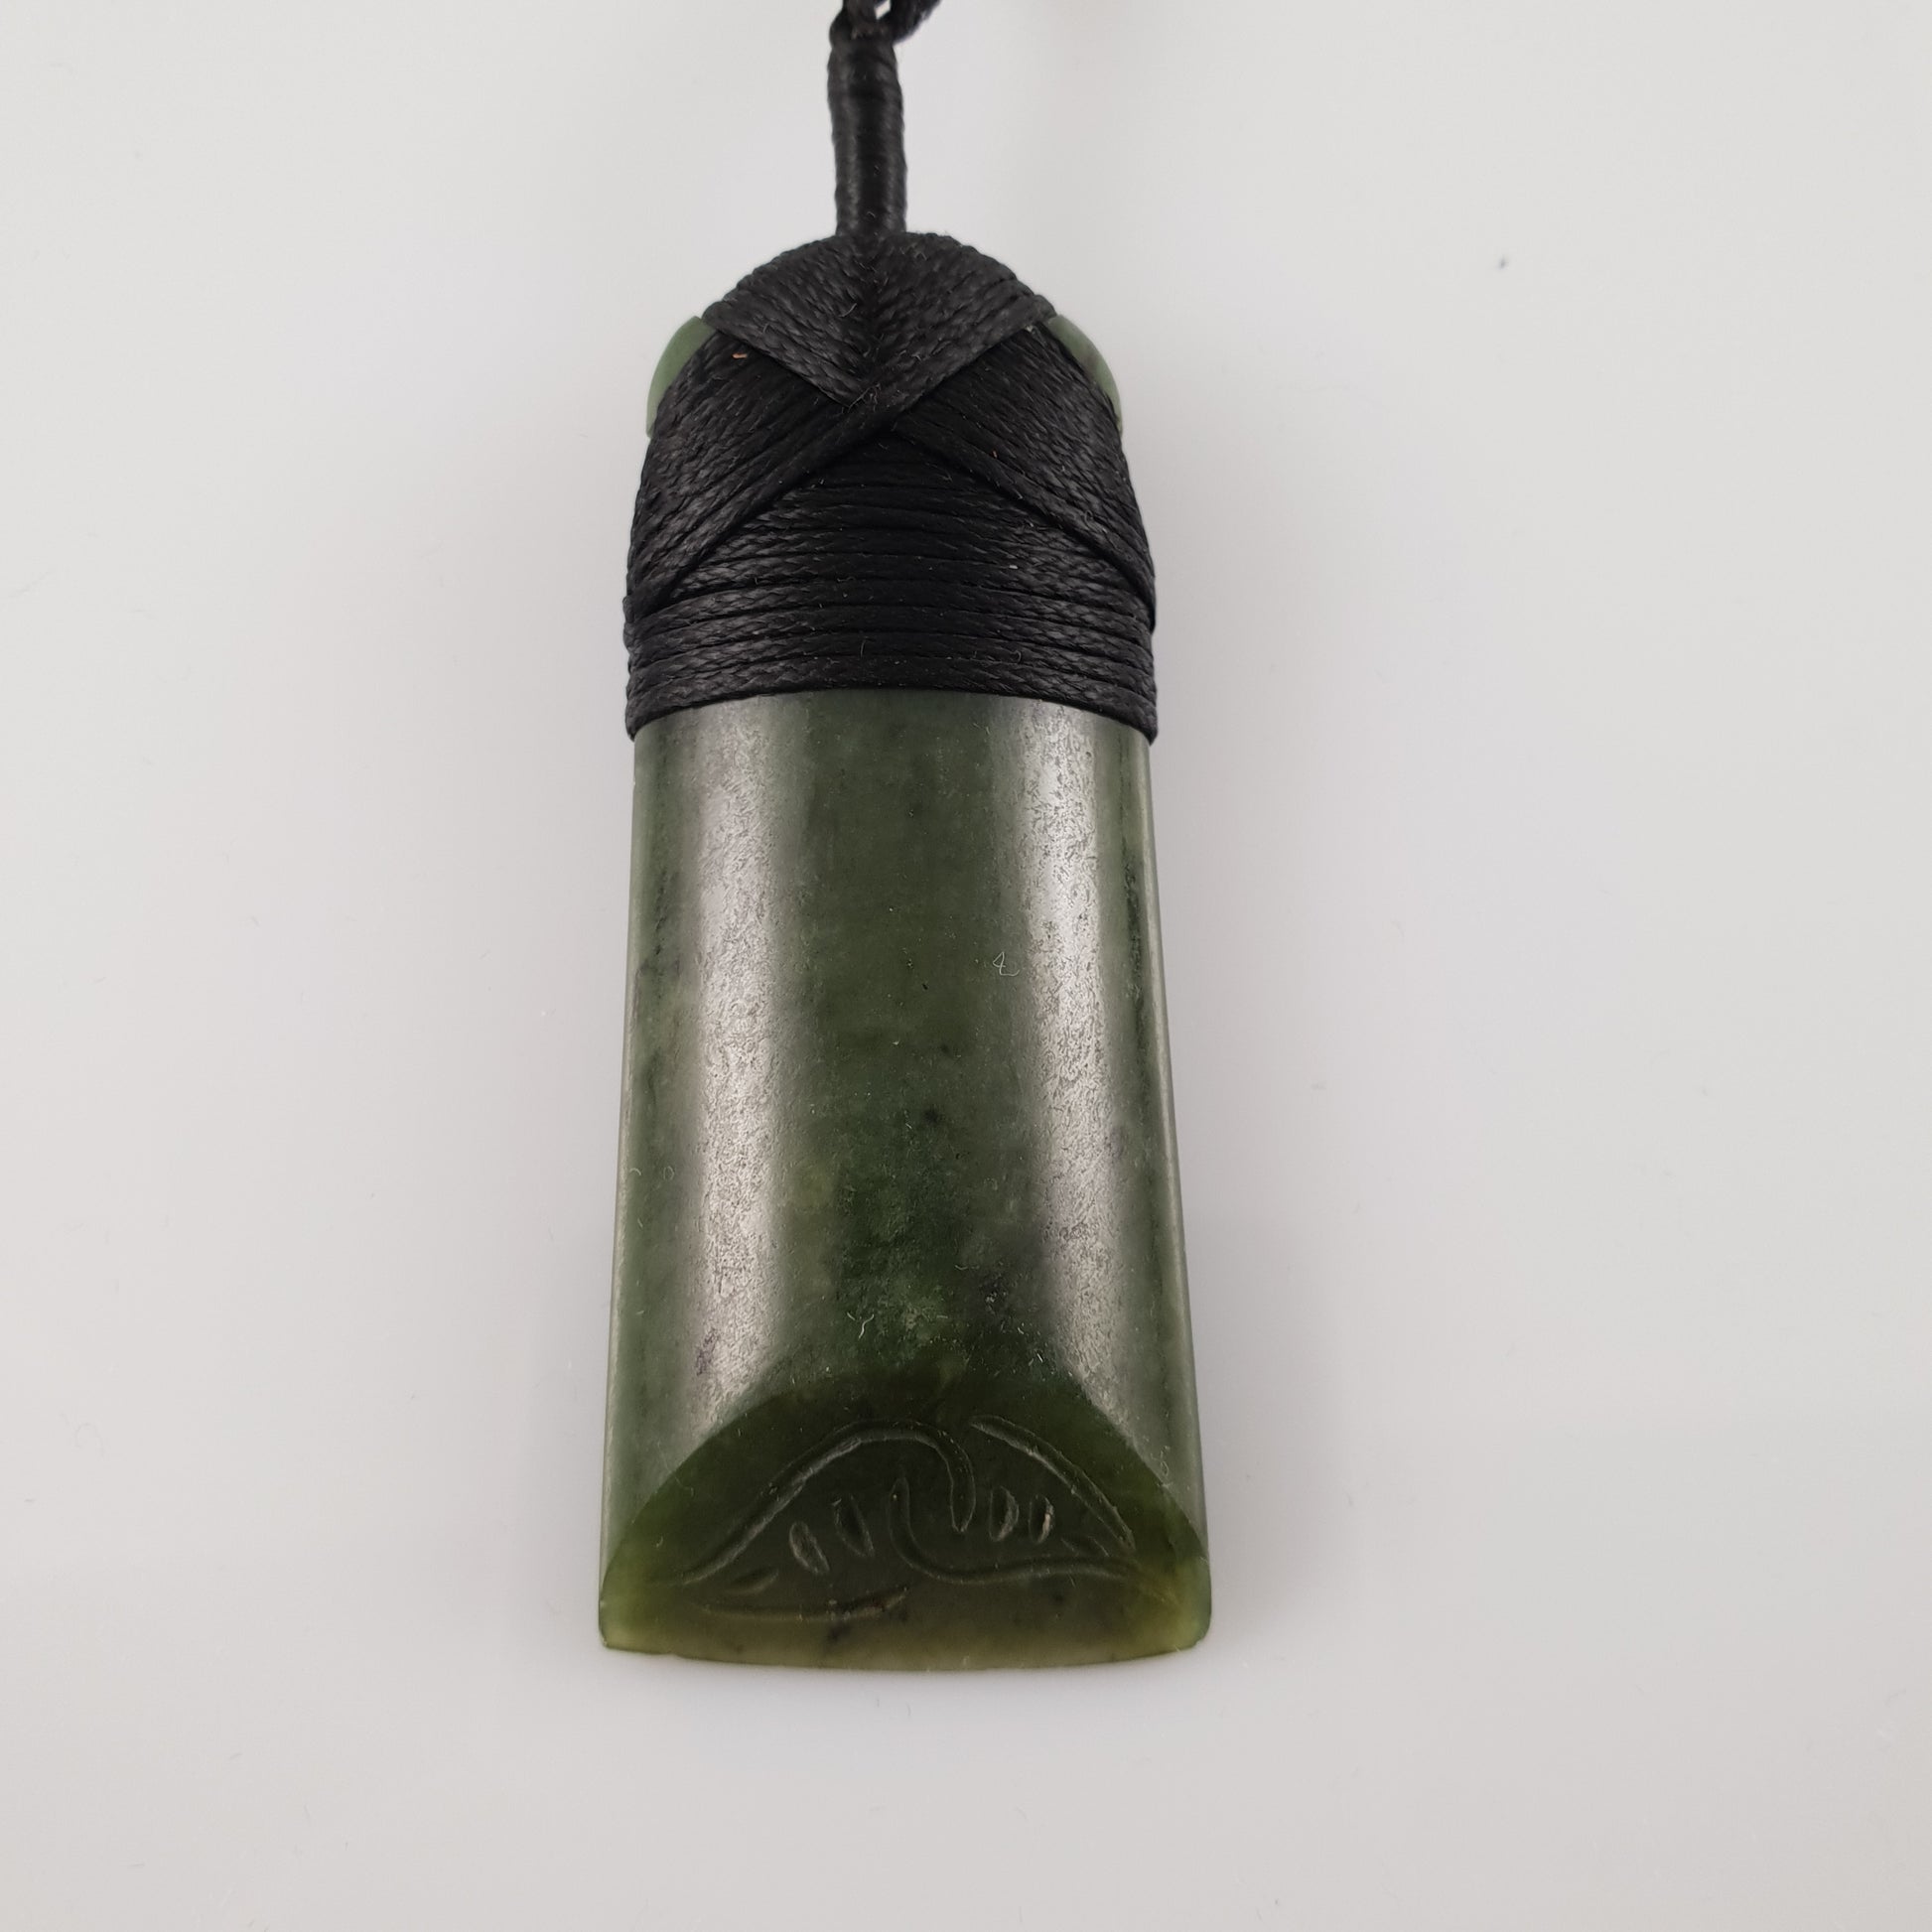 Greenstone Toki Pendant 60x25mm with Whale Carving Detail - Rivendell Shop